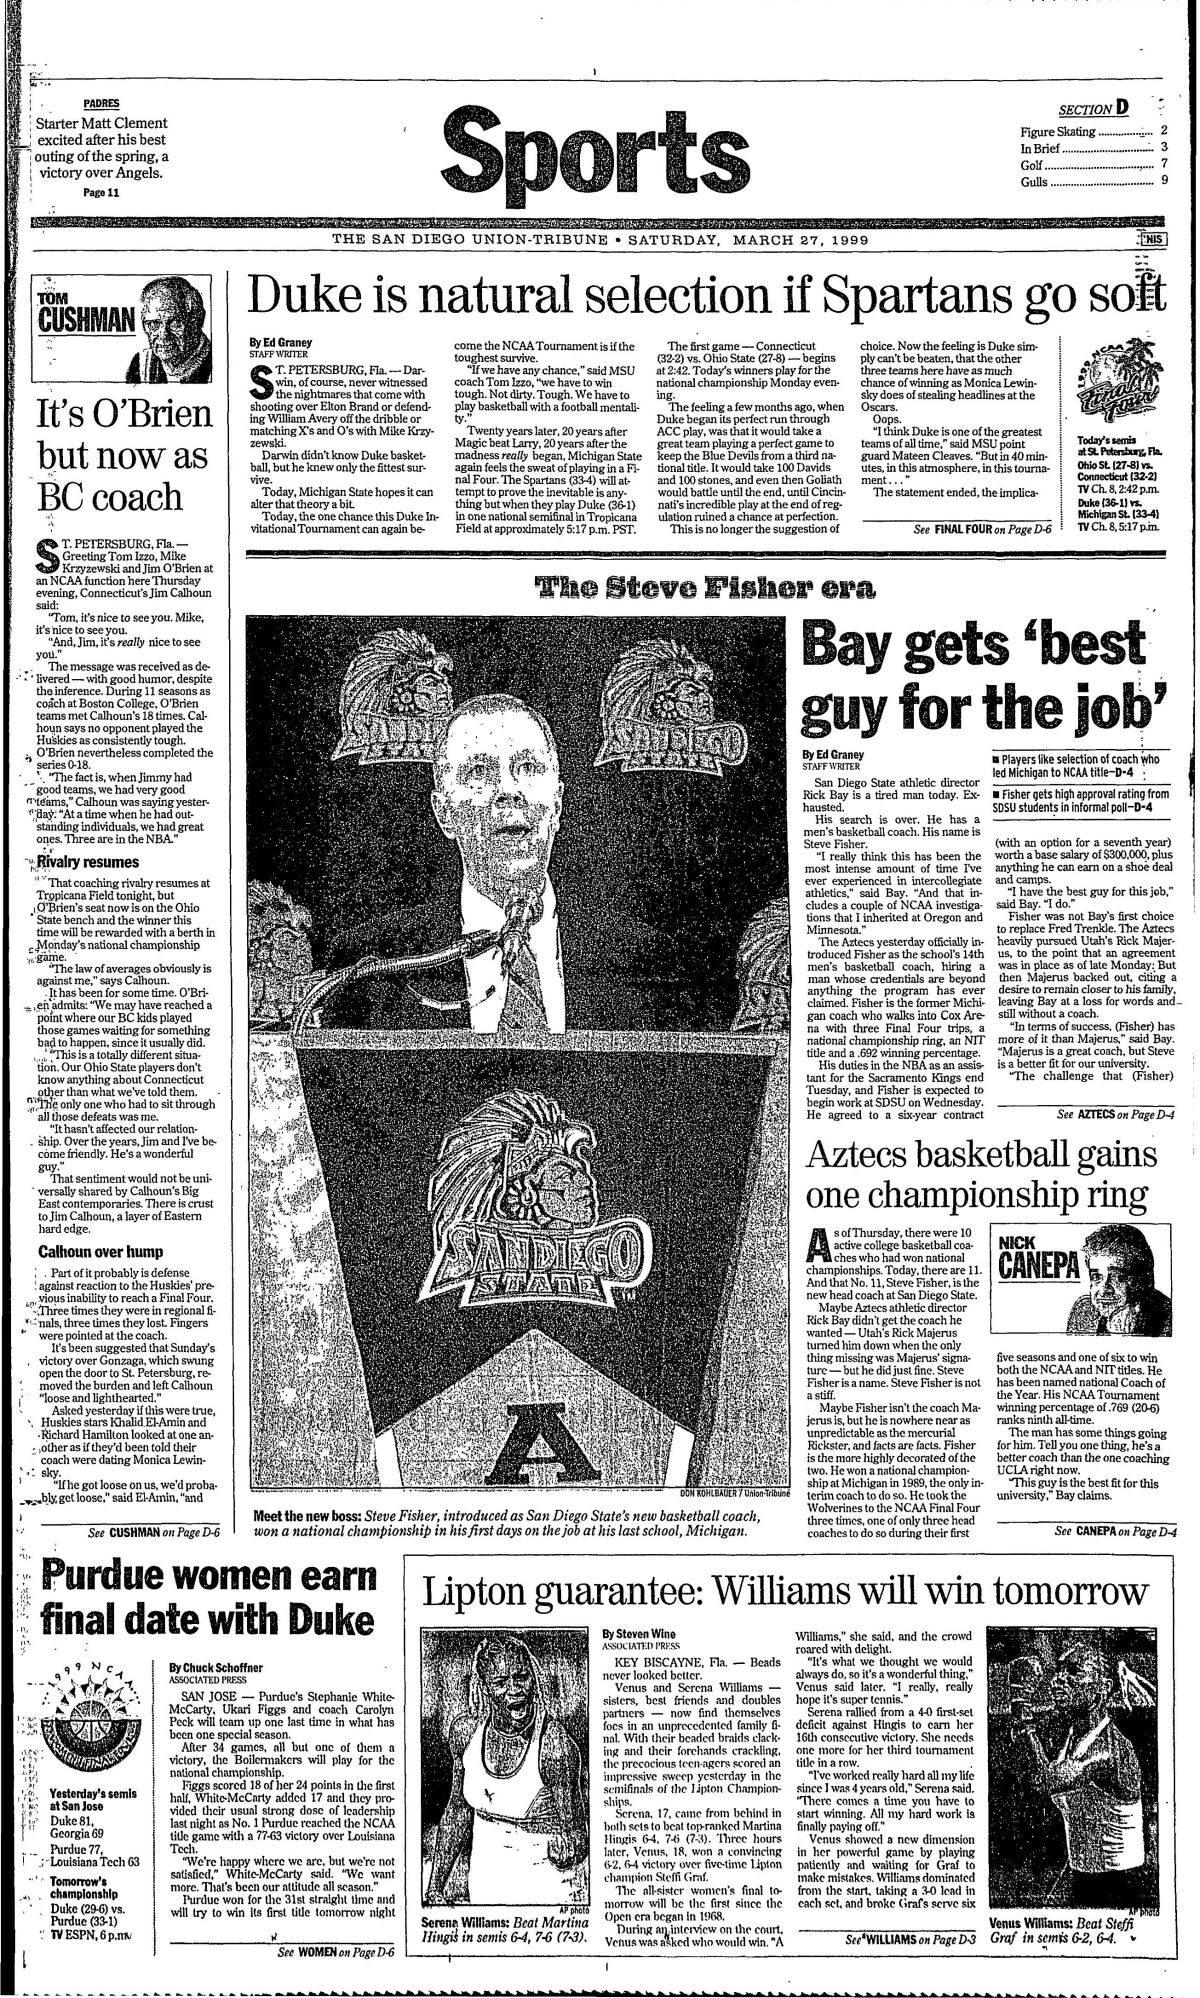 Front page of the Sports section of The San Diego Union-Tribune, March 27, 1999 